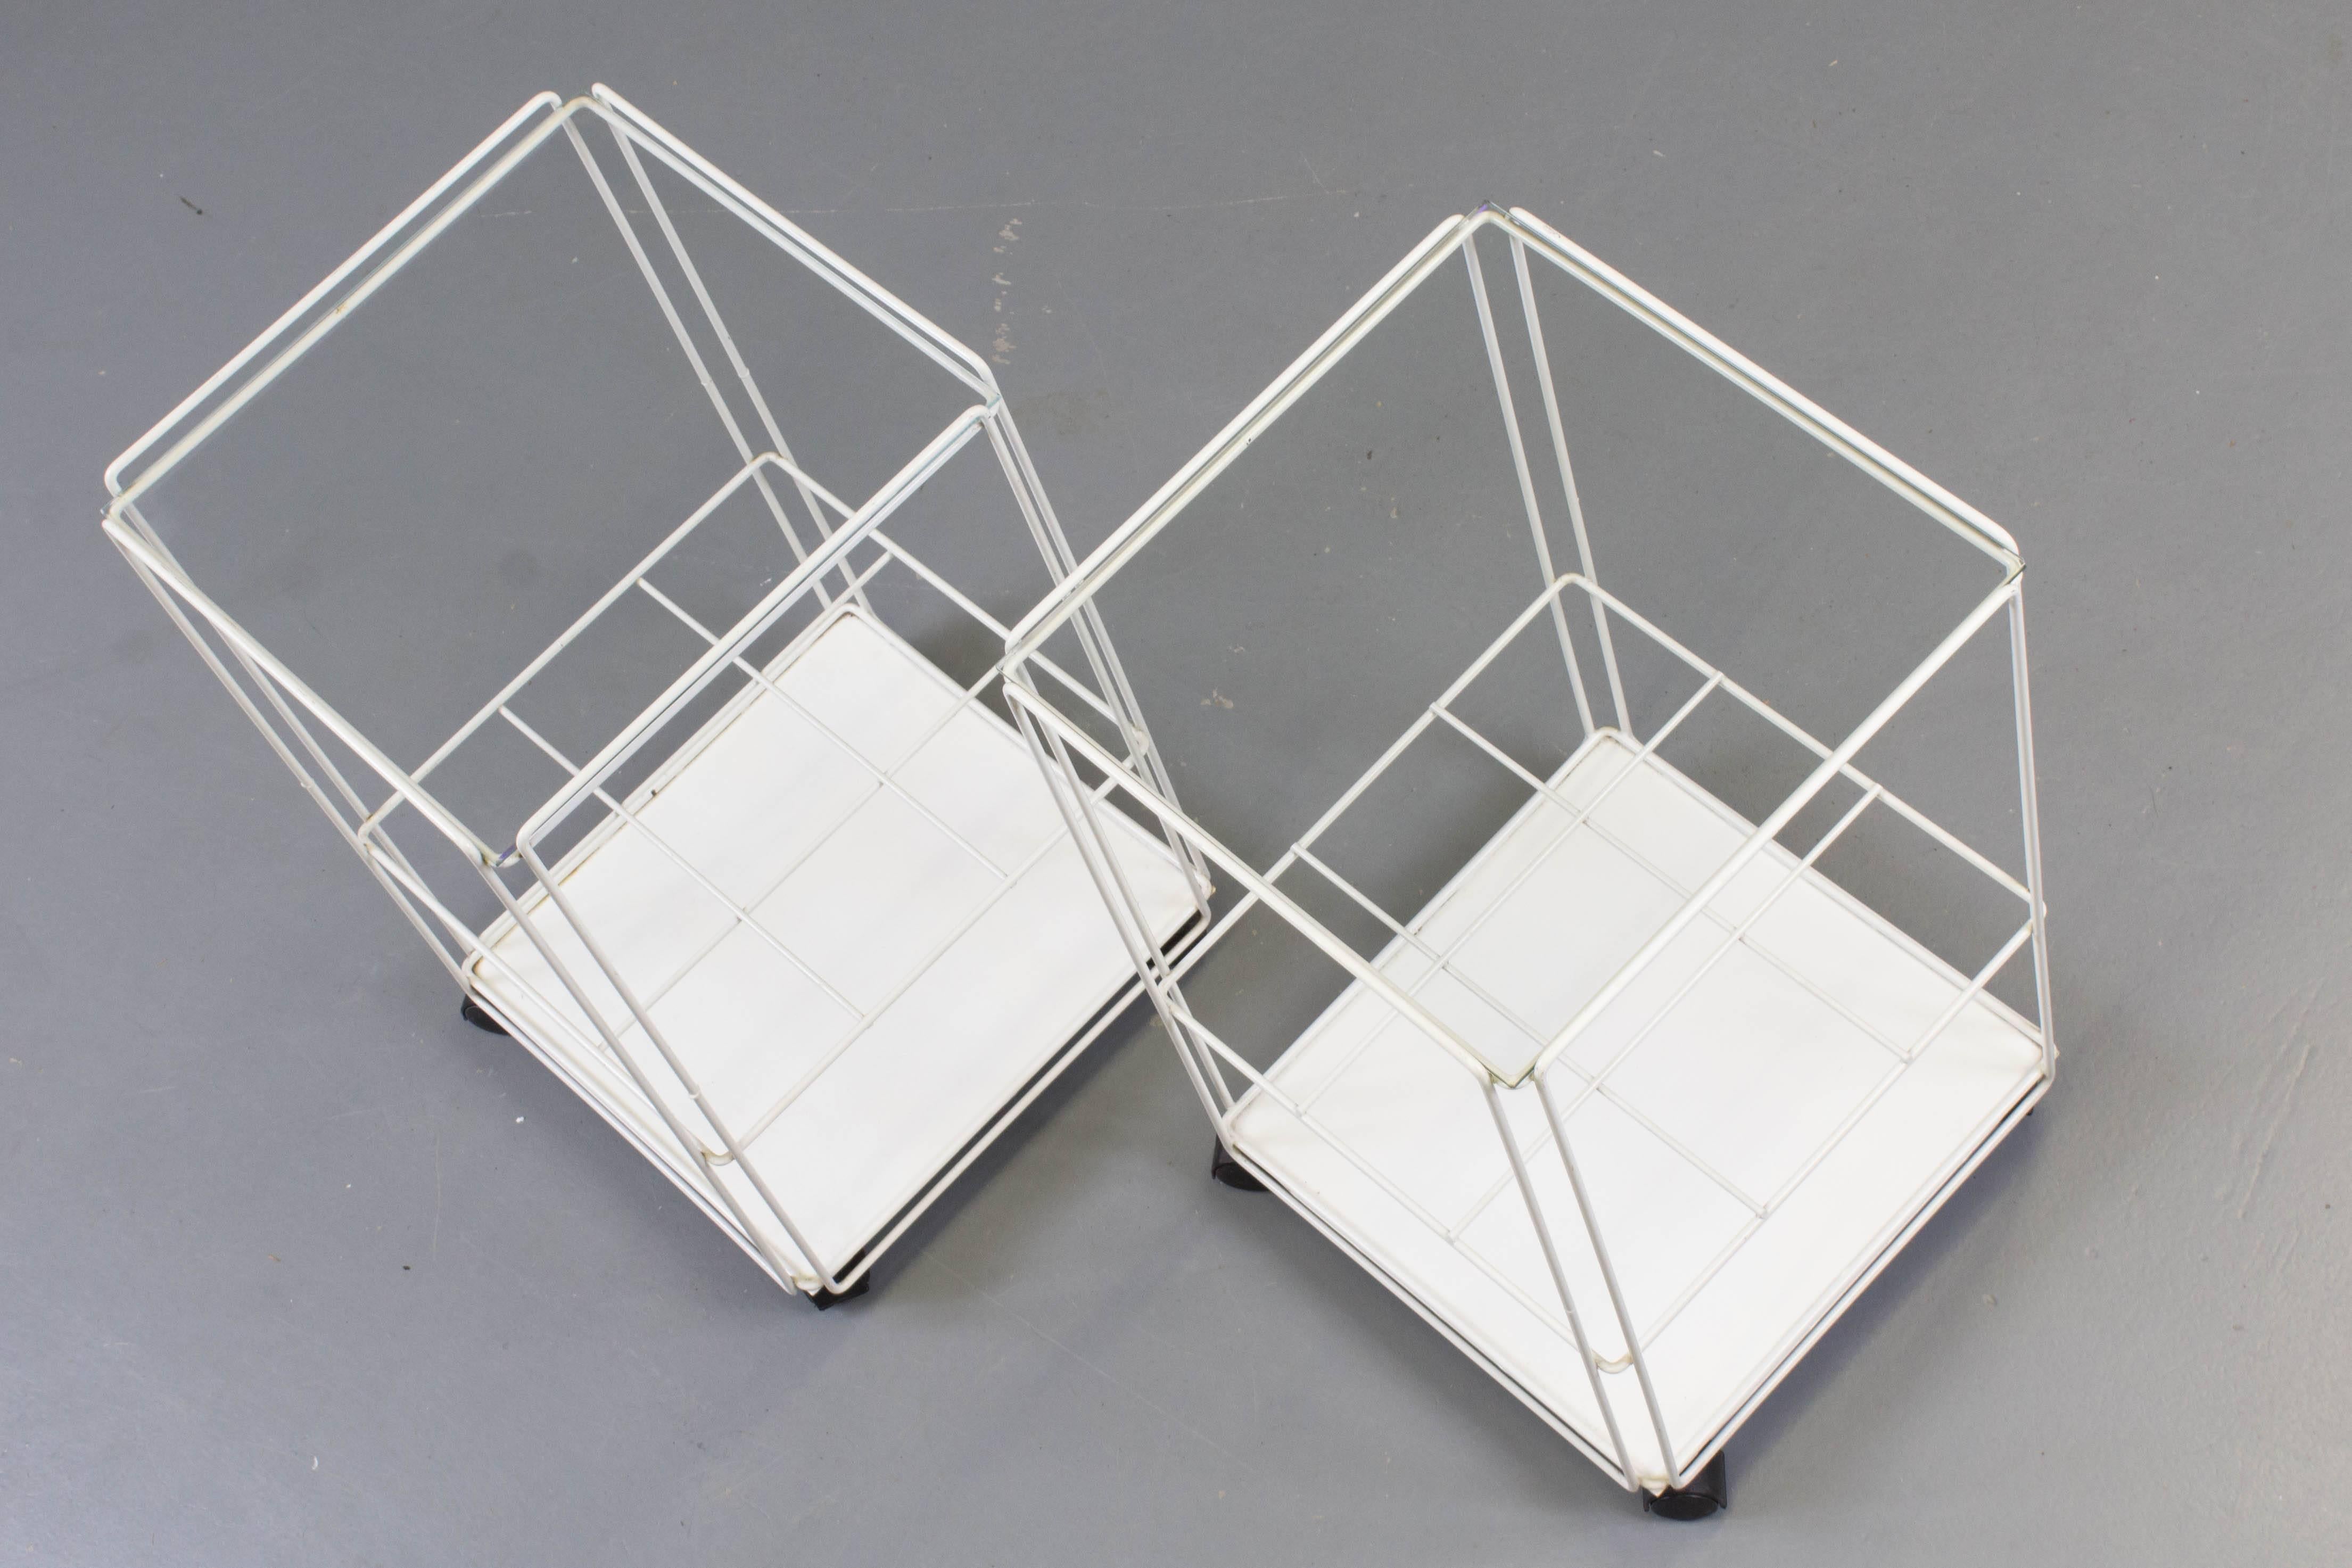 Pair of Mid-Century Modern two-tier Isocele tables or trolleys by Max Sauze, 1970s.
White lacquered metal base with clear glass tops.
In good original condition with minor wear consistent with age and use.